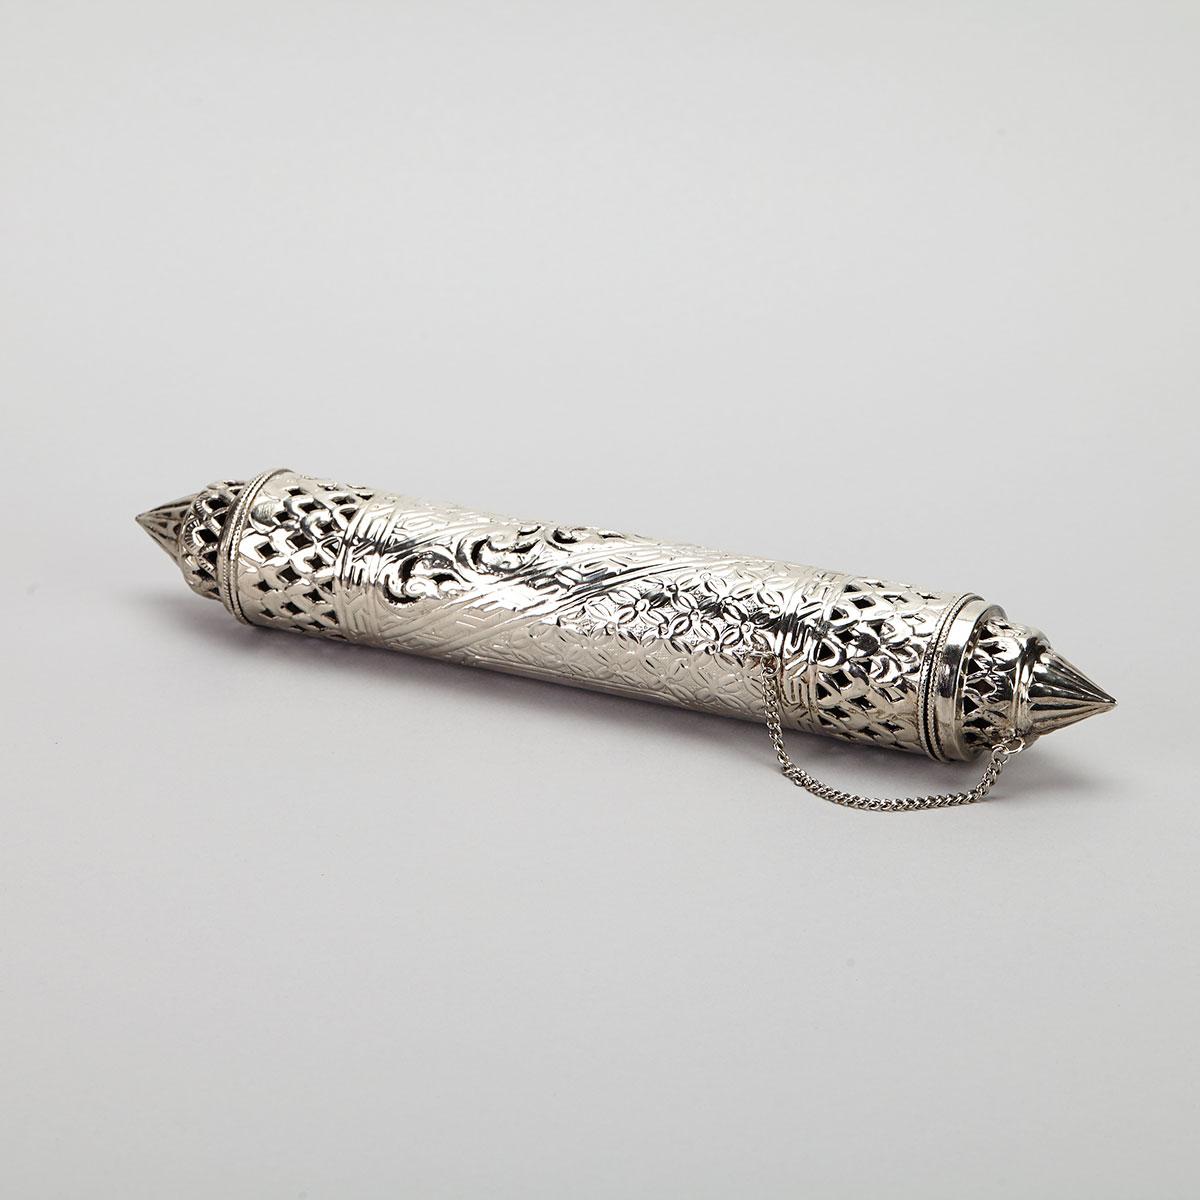 Middle-Eastern Silver Scroll Case, late 19th/20th century